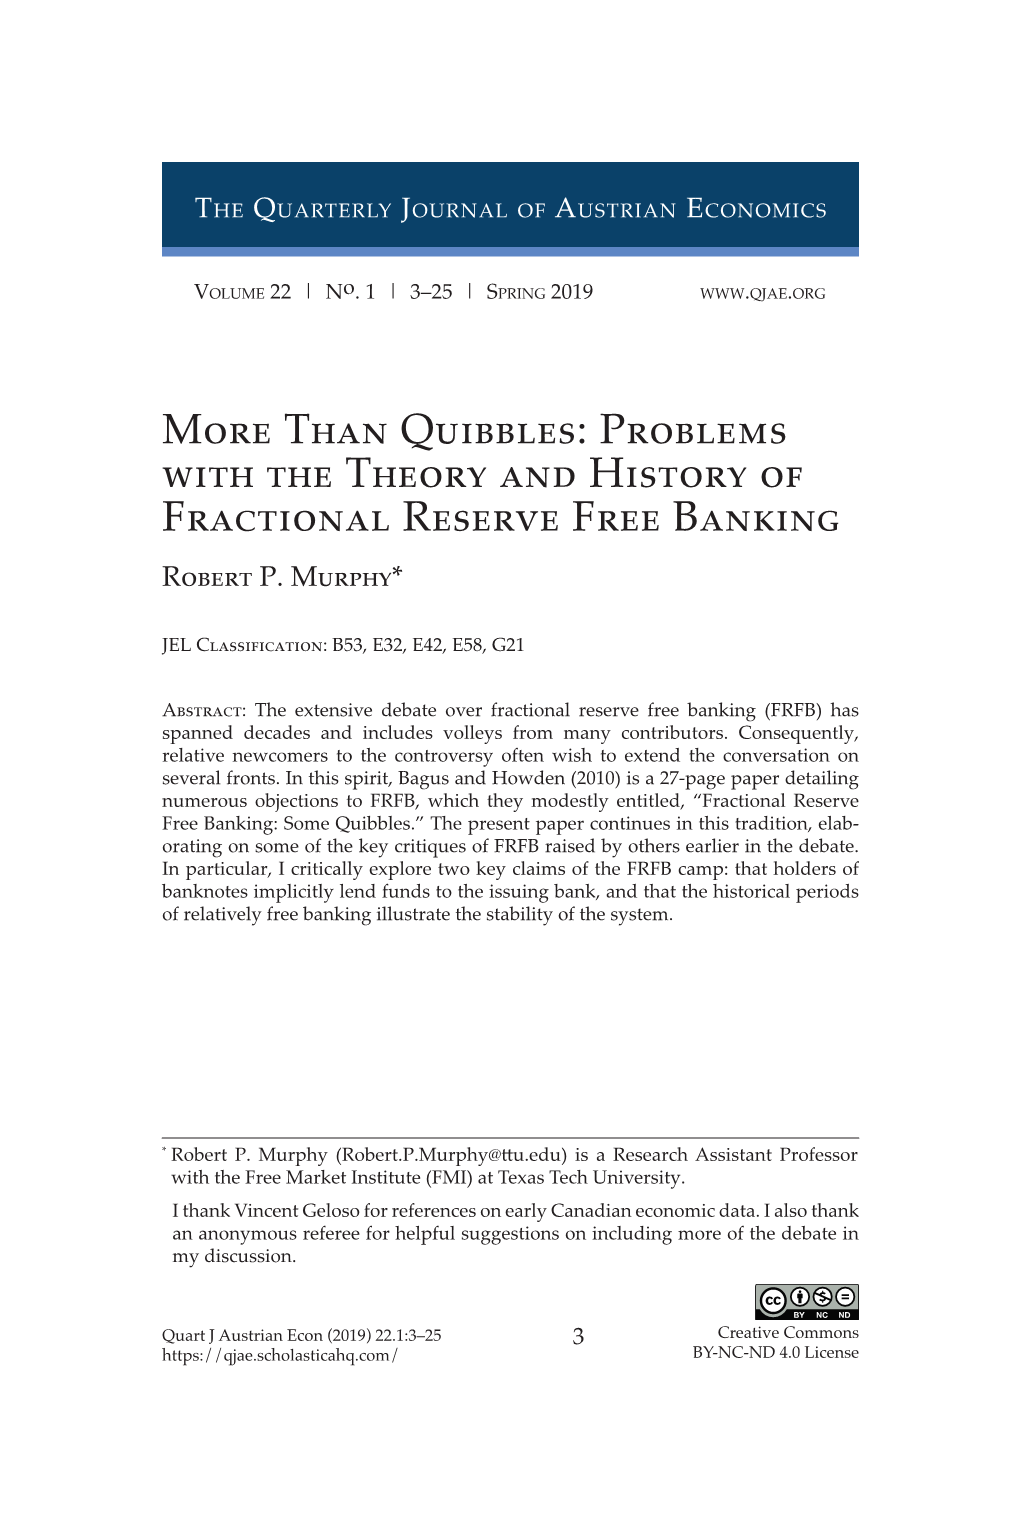 Than Quibbles: Problems with the Theory and History of Fractional Reserve Free Banking Robert P